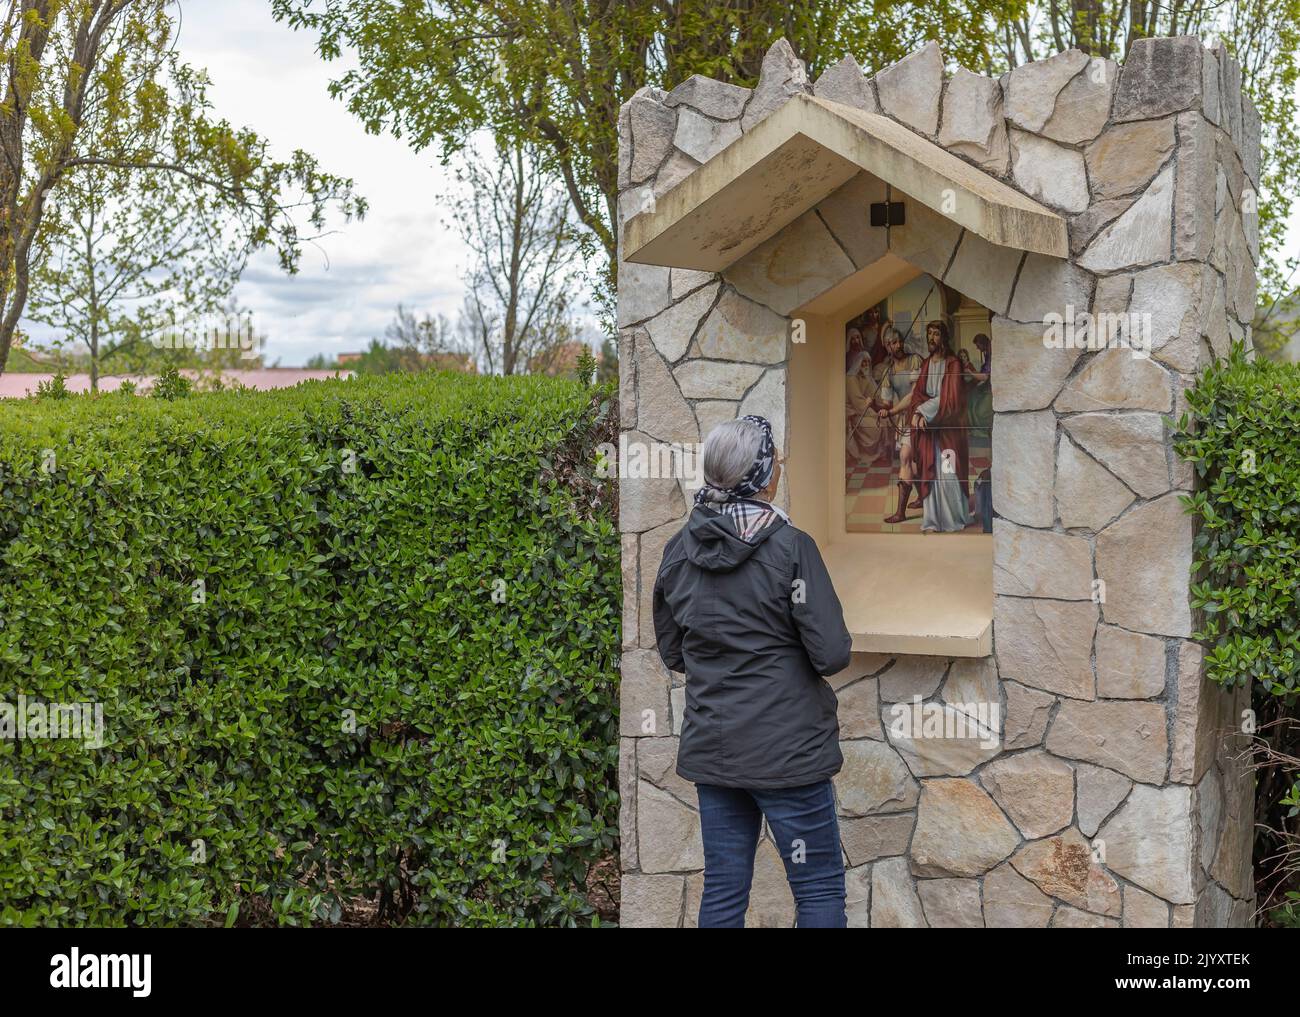 Medjugorje, Bosnia and Herzegovina - April 23rd, 2022 - Worshipper at the religious site in Medjugorje looking at the depiction of the story of Christ Stock Photo